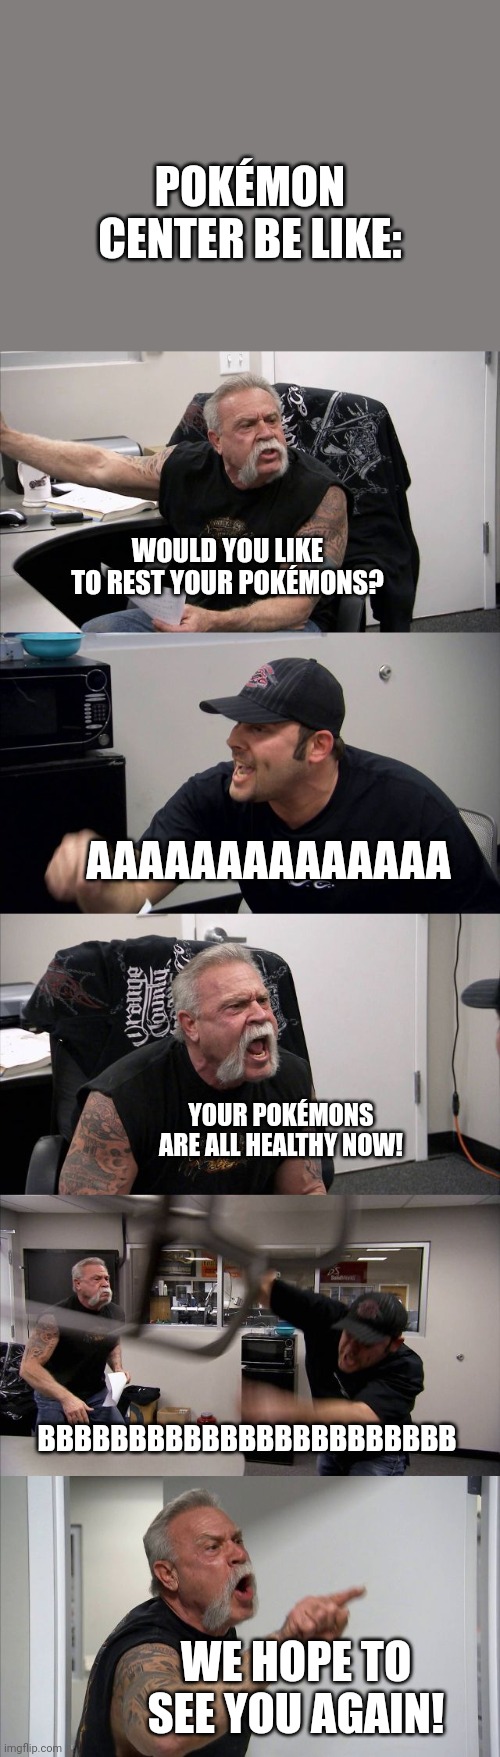 American Chopper Argument | POKÉMON CENTER BE LIKE:; WOULD YOU LIKE TO REST YOUR POKÉMONS? AAAAAAAAAAAAAA; YOUR POKÉMONS ARE ALL HEALTHY NOW! BBBBBBBBBBBBBBBBBBBBBBB; WE HOPE TO SEE YOU AGAIN! | image tagged in memes,american chopper argument | made w/ Imgflip meme maker